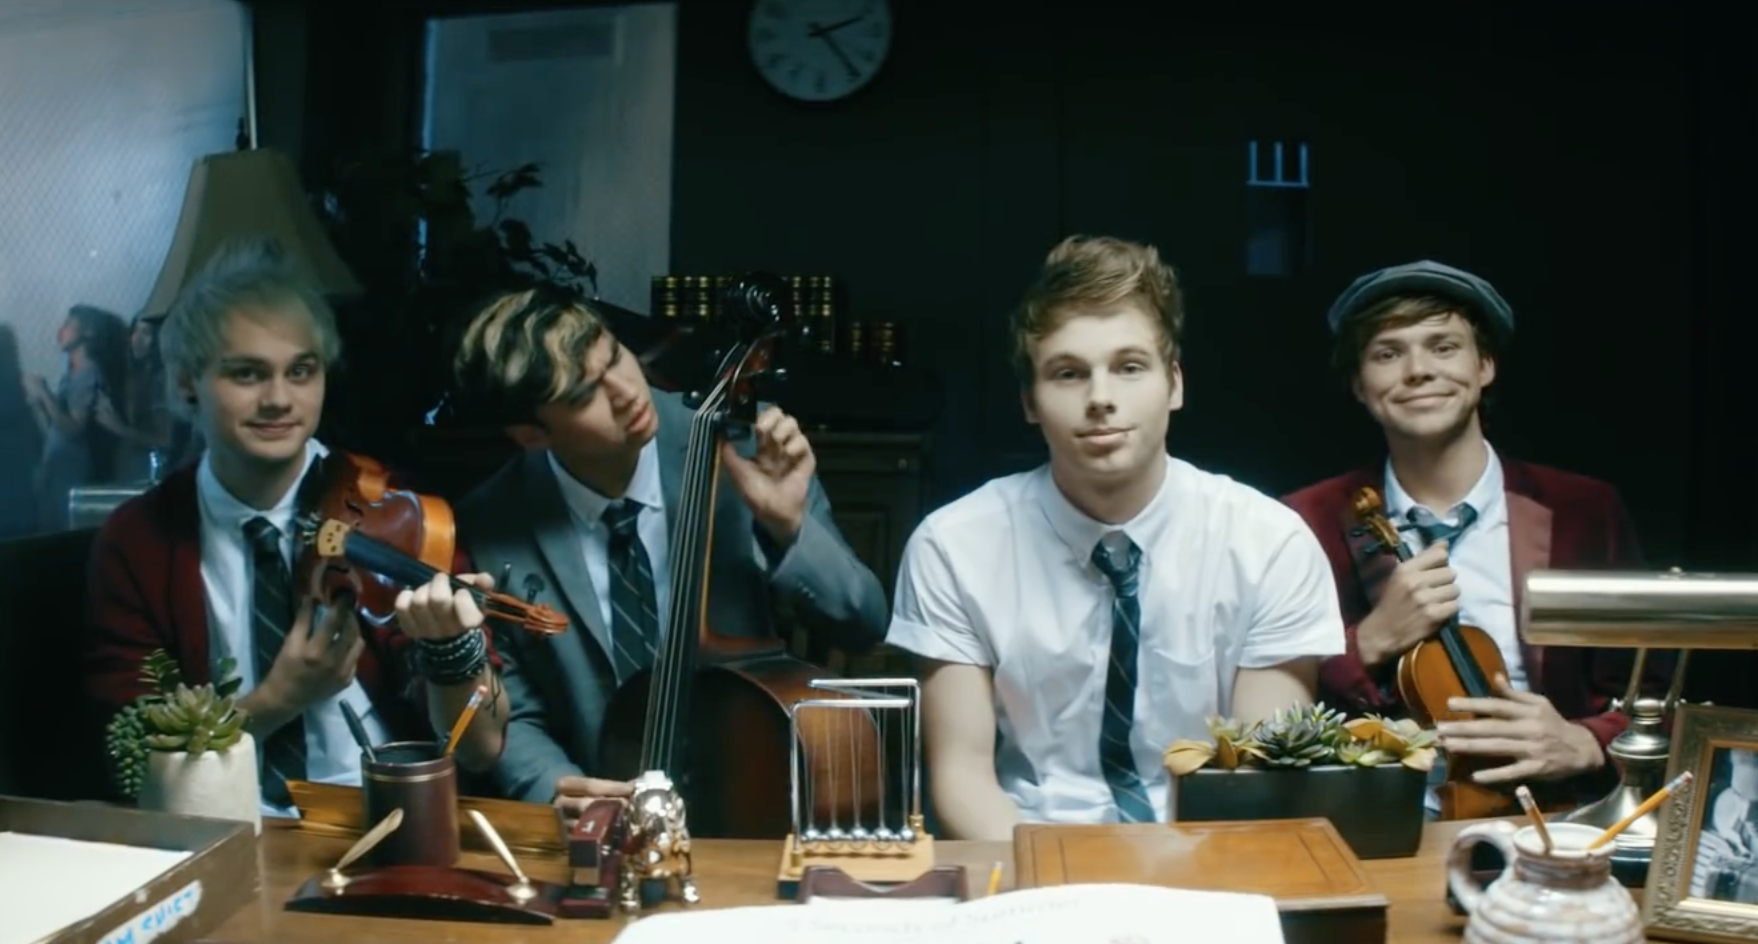 A Definitive Ranking of 5 Seconds of Summer’s Music Videos